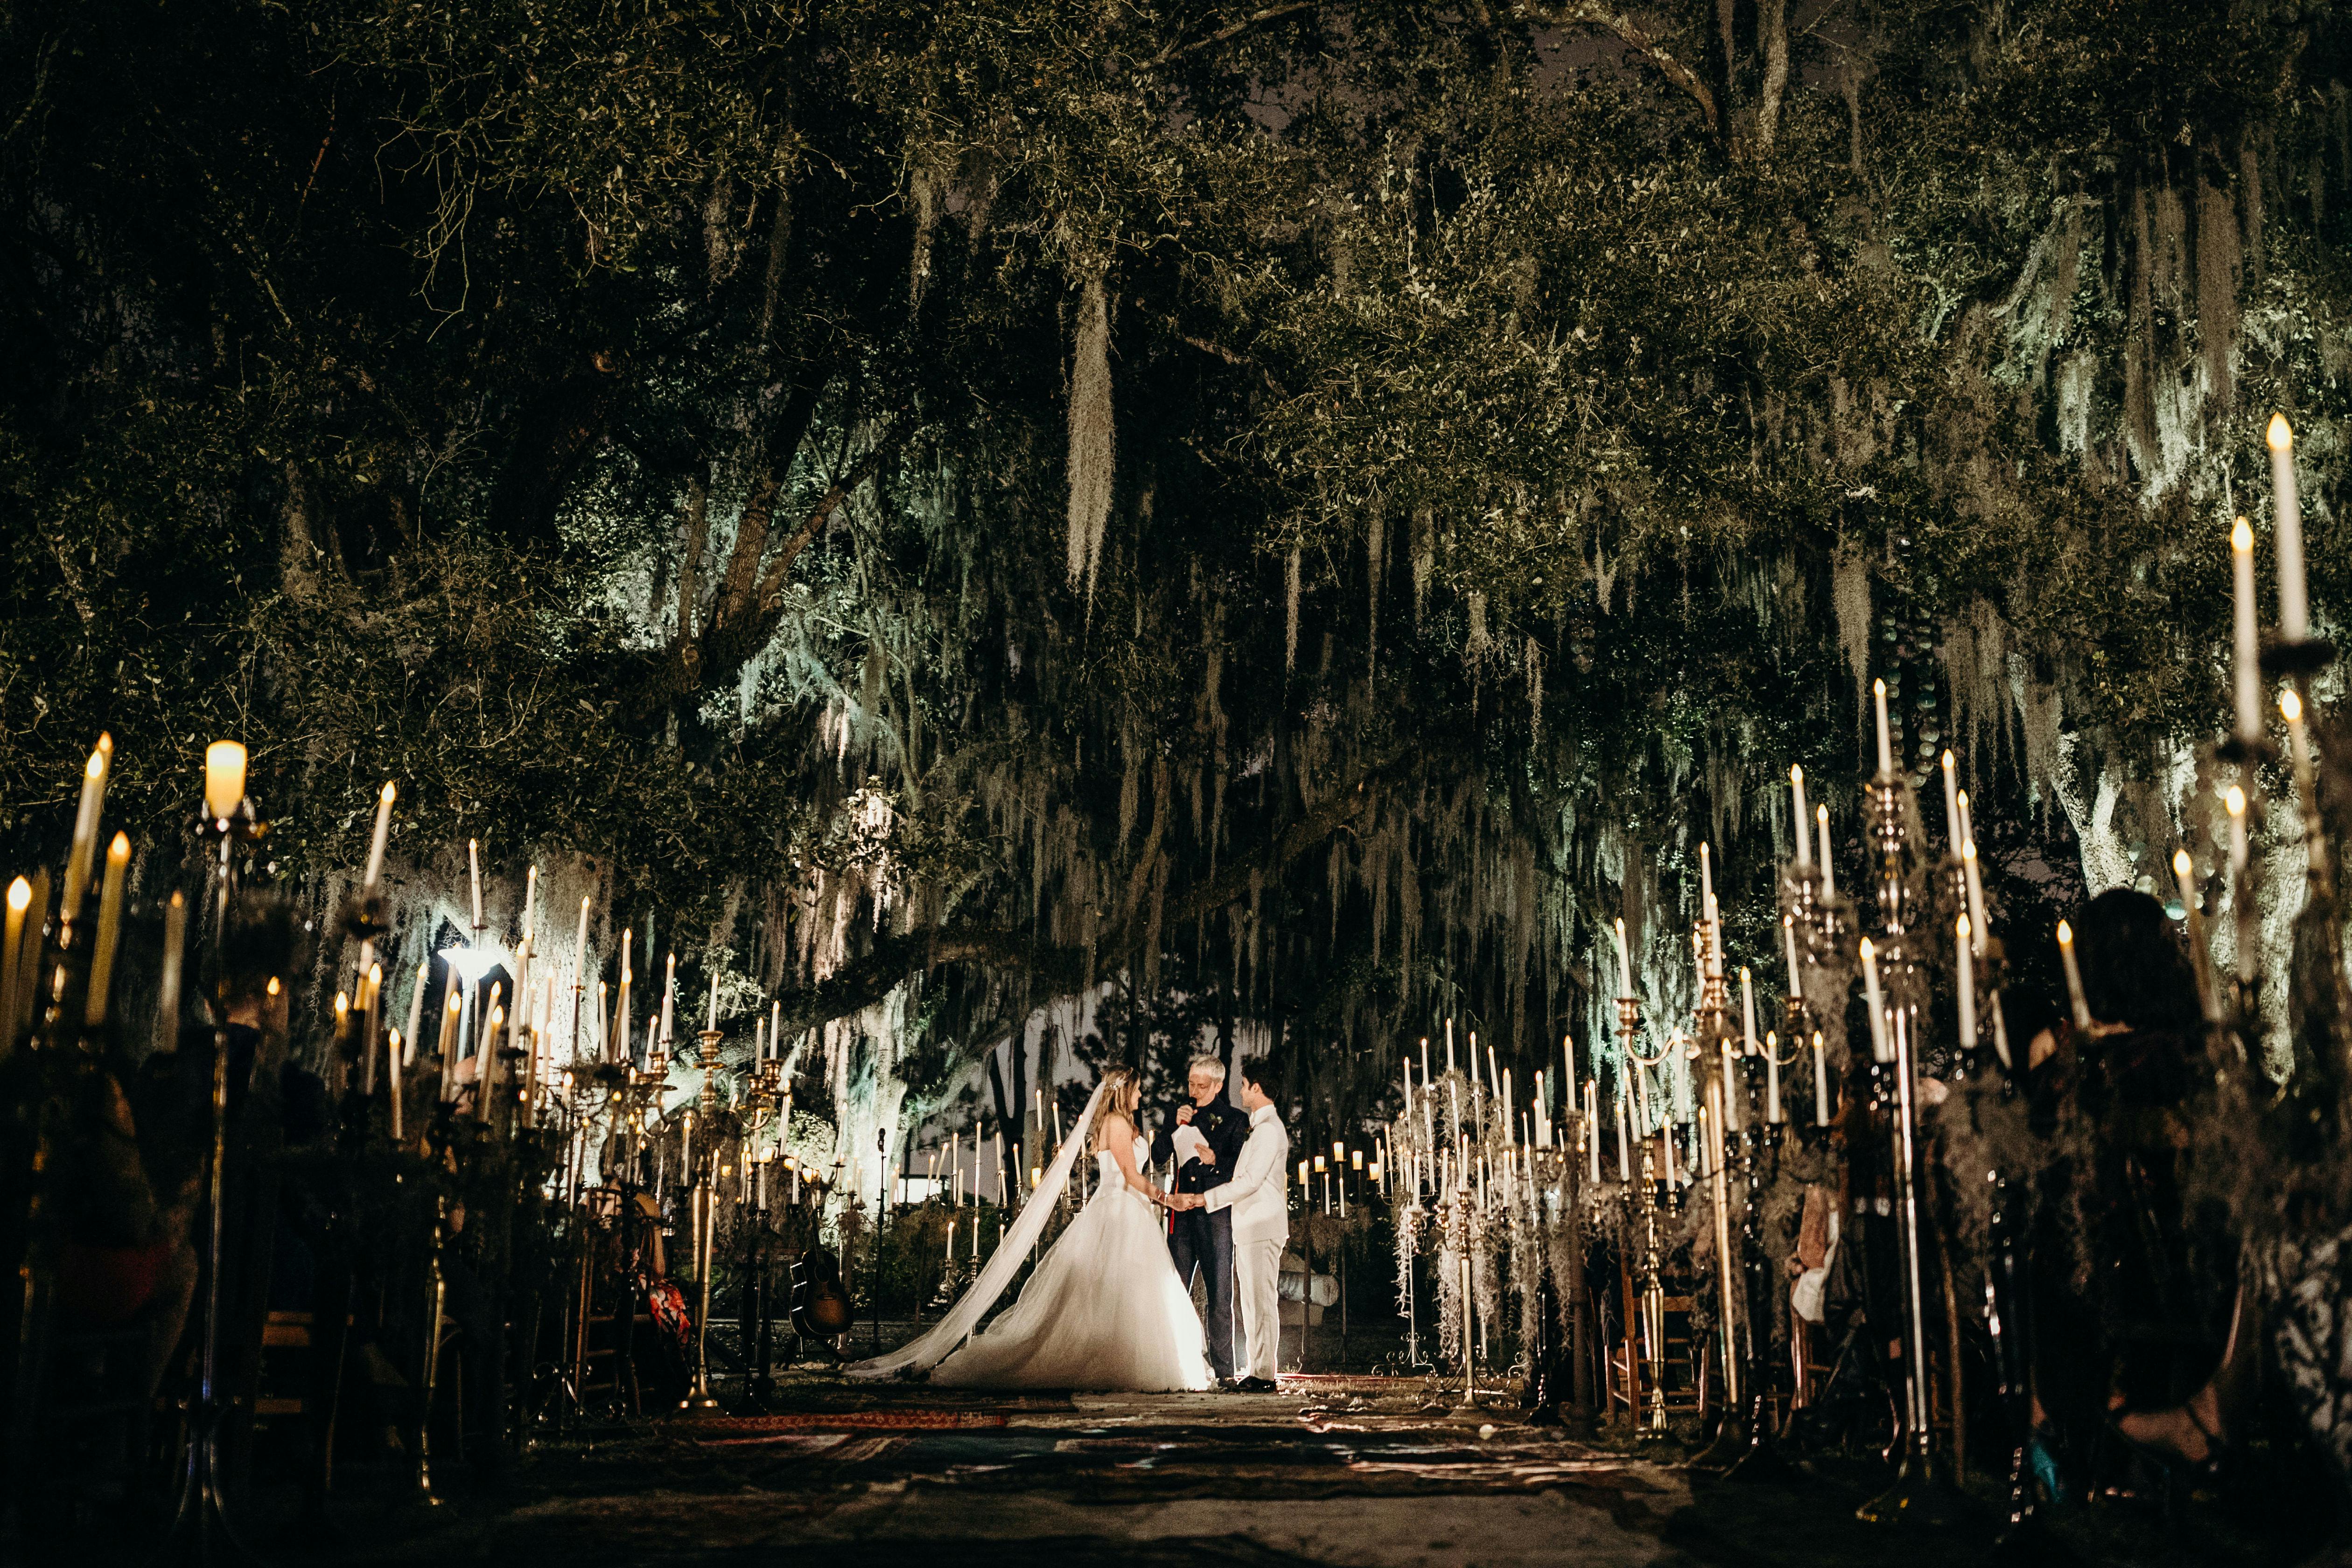 Free-Spirited Musical Extravaganza in NOLA With Candle-Lit Wedding Aisle Décor